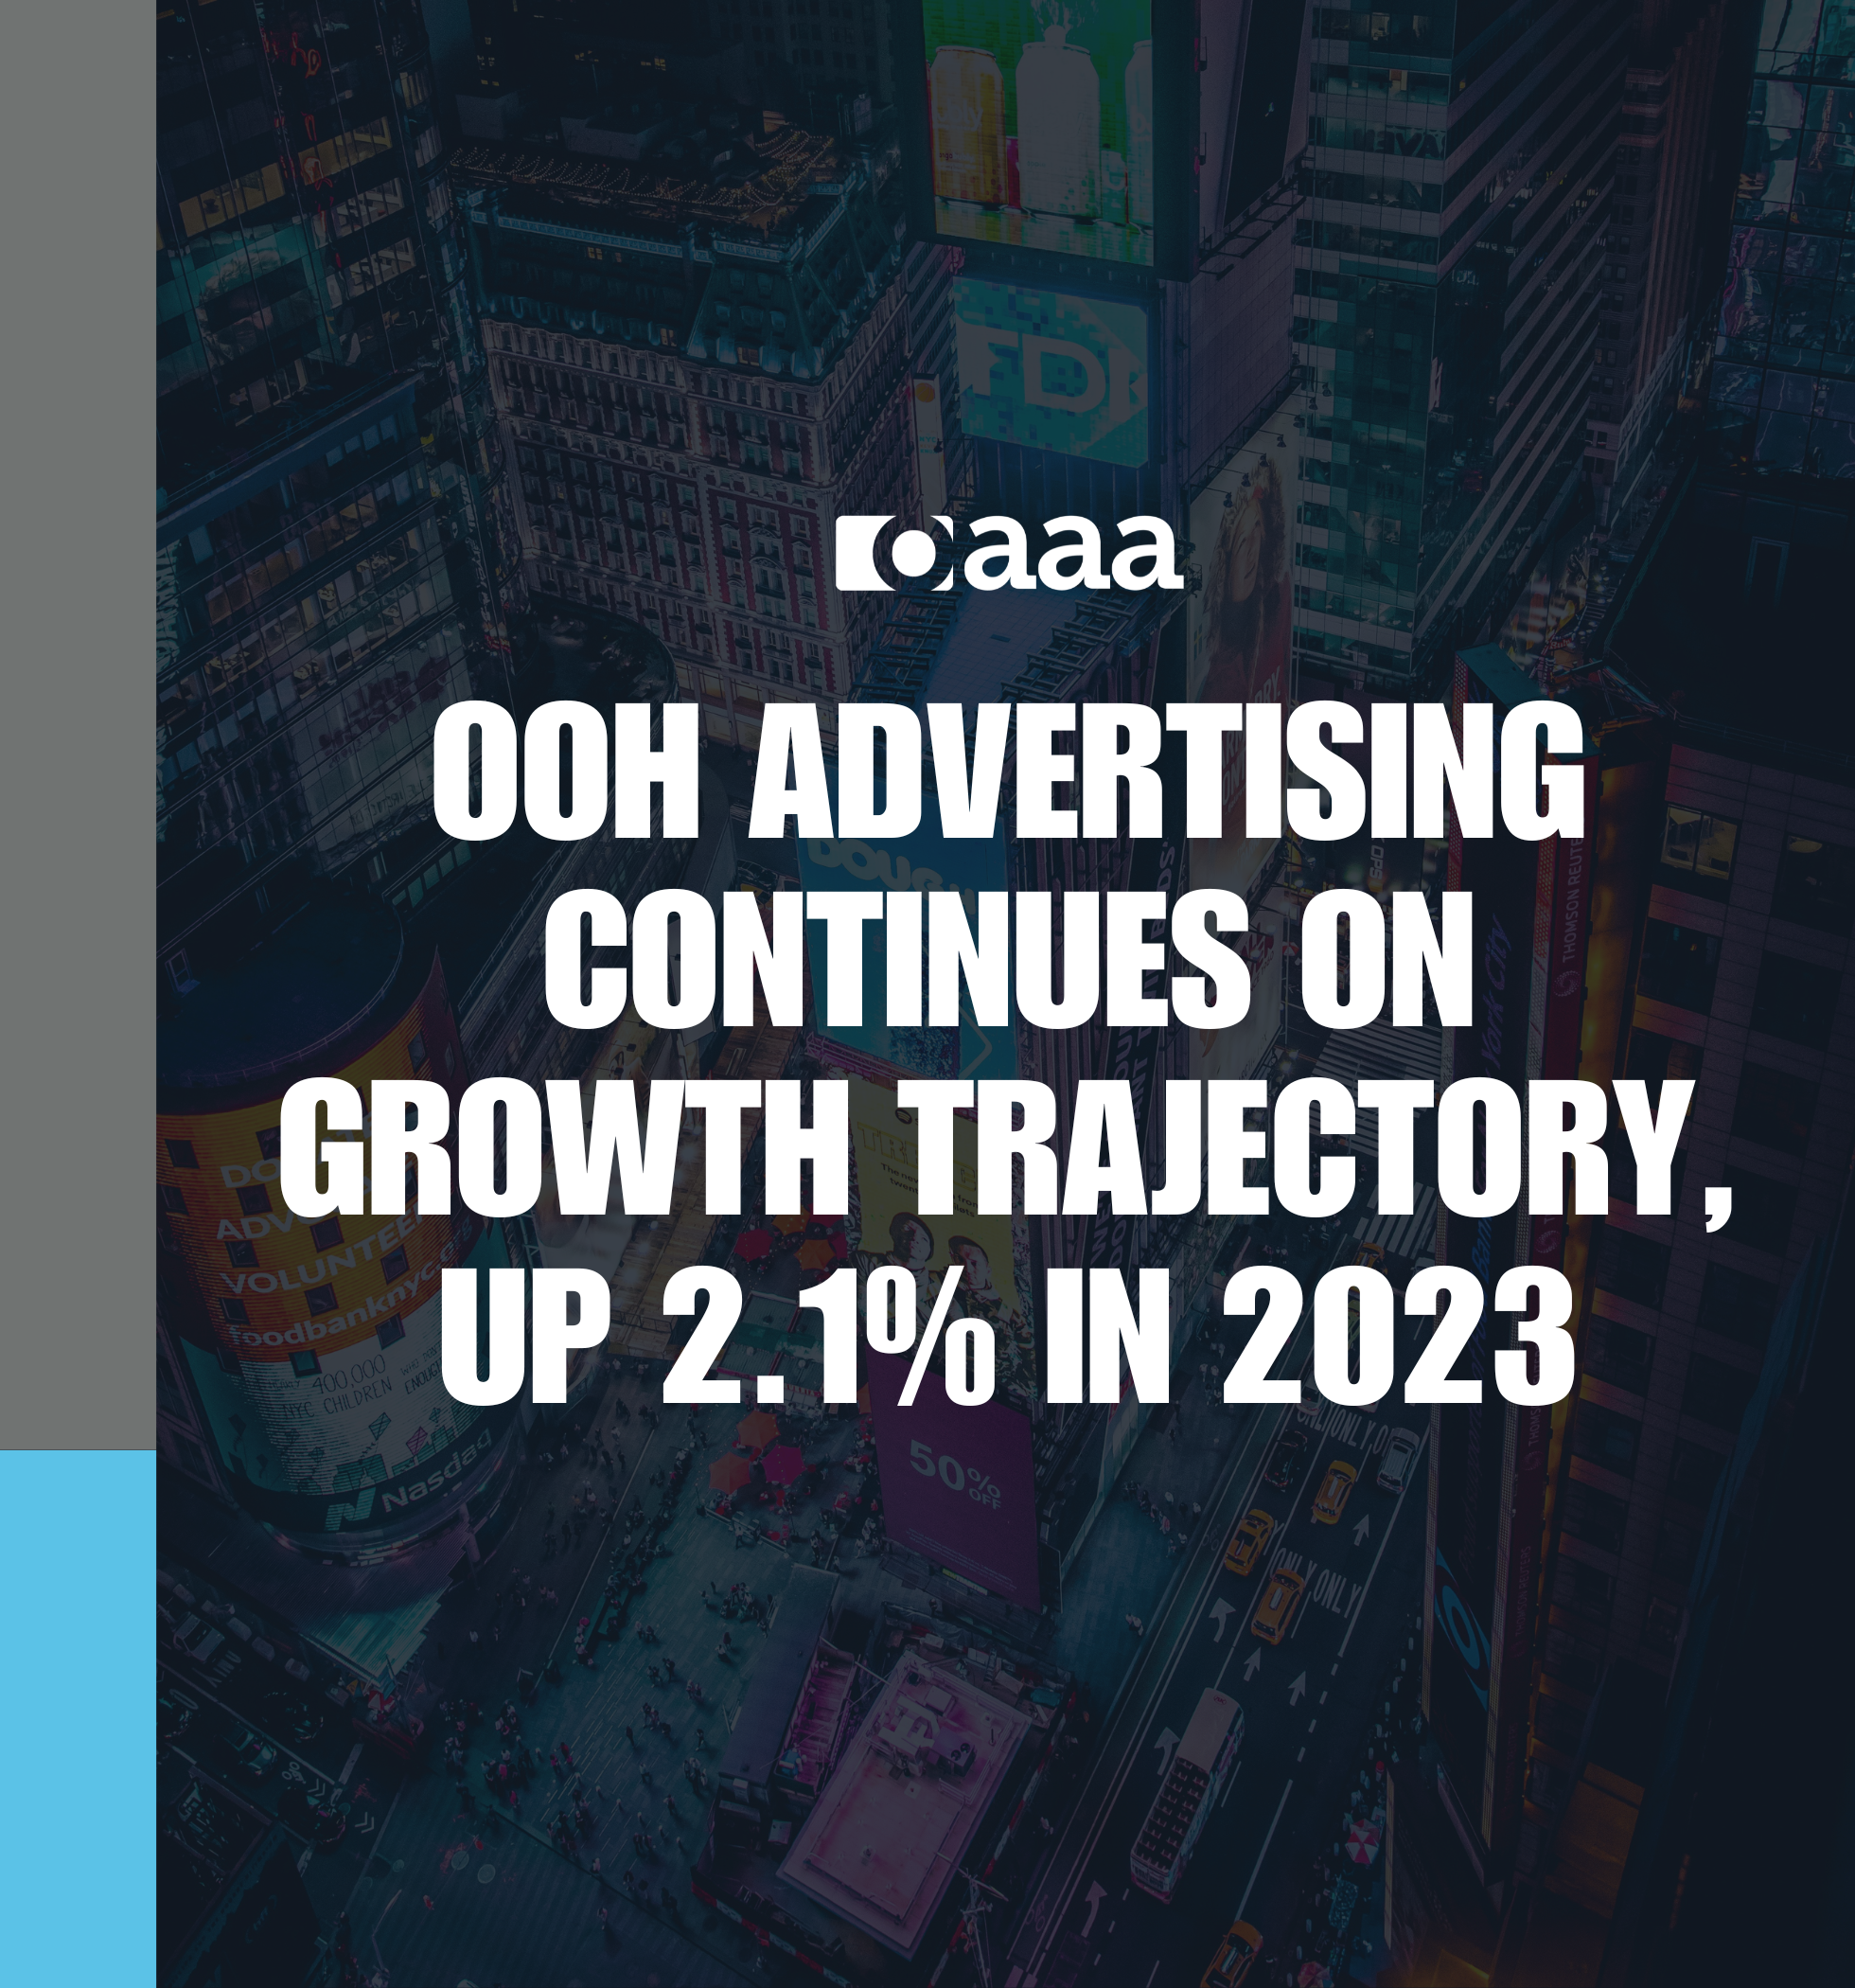 Out of Home Advertising Continues On Growth Trajectory, Up 2.1% in 2023